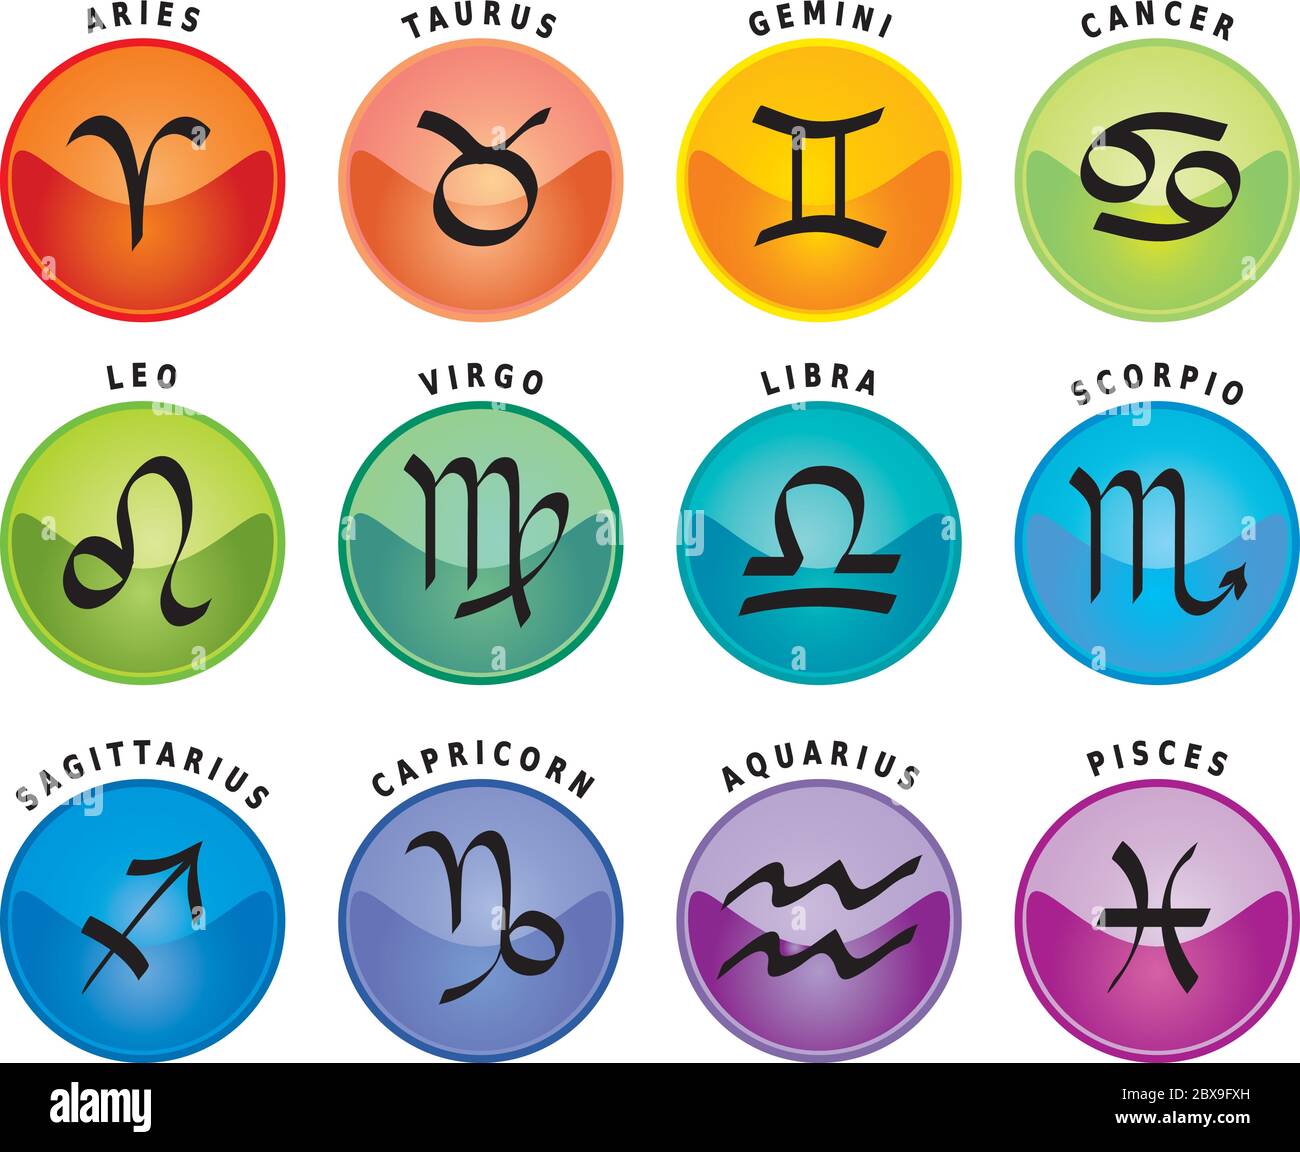 12 zodiac signs and their symbols